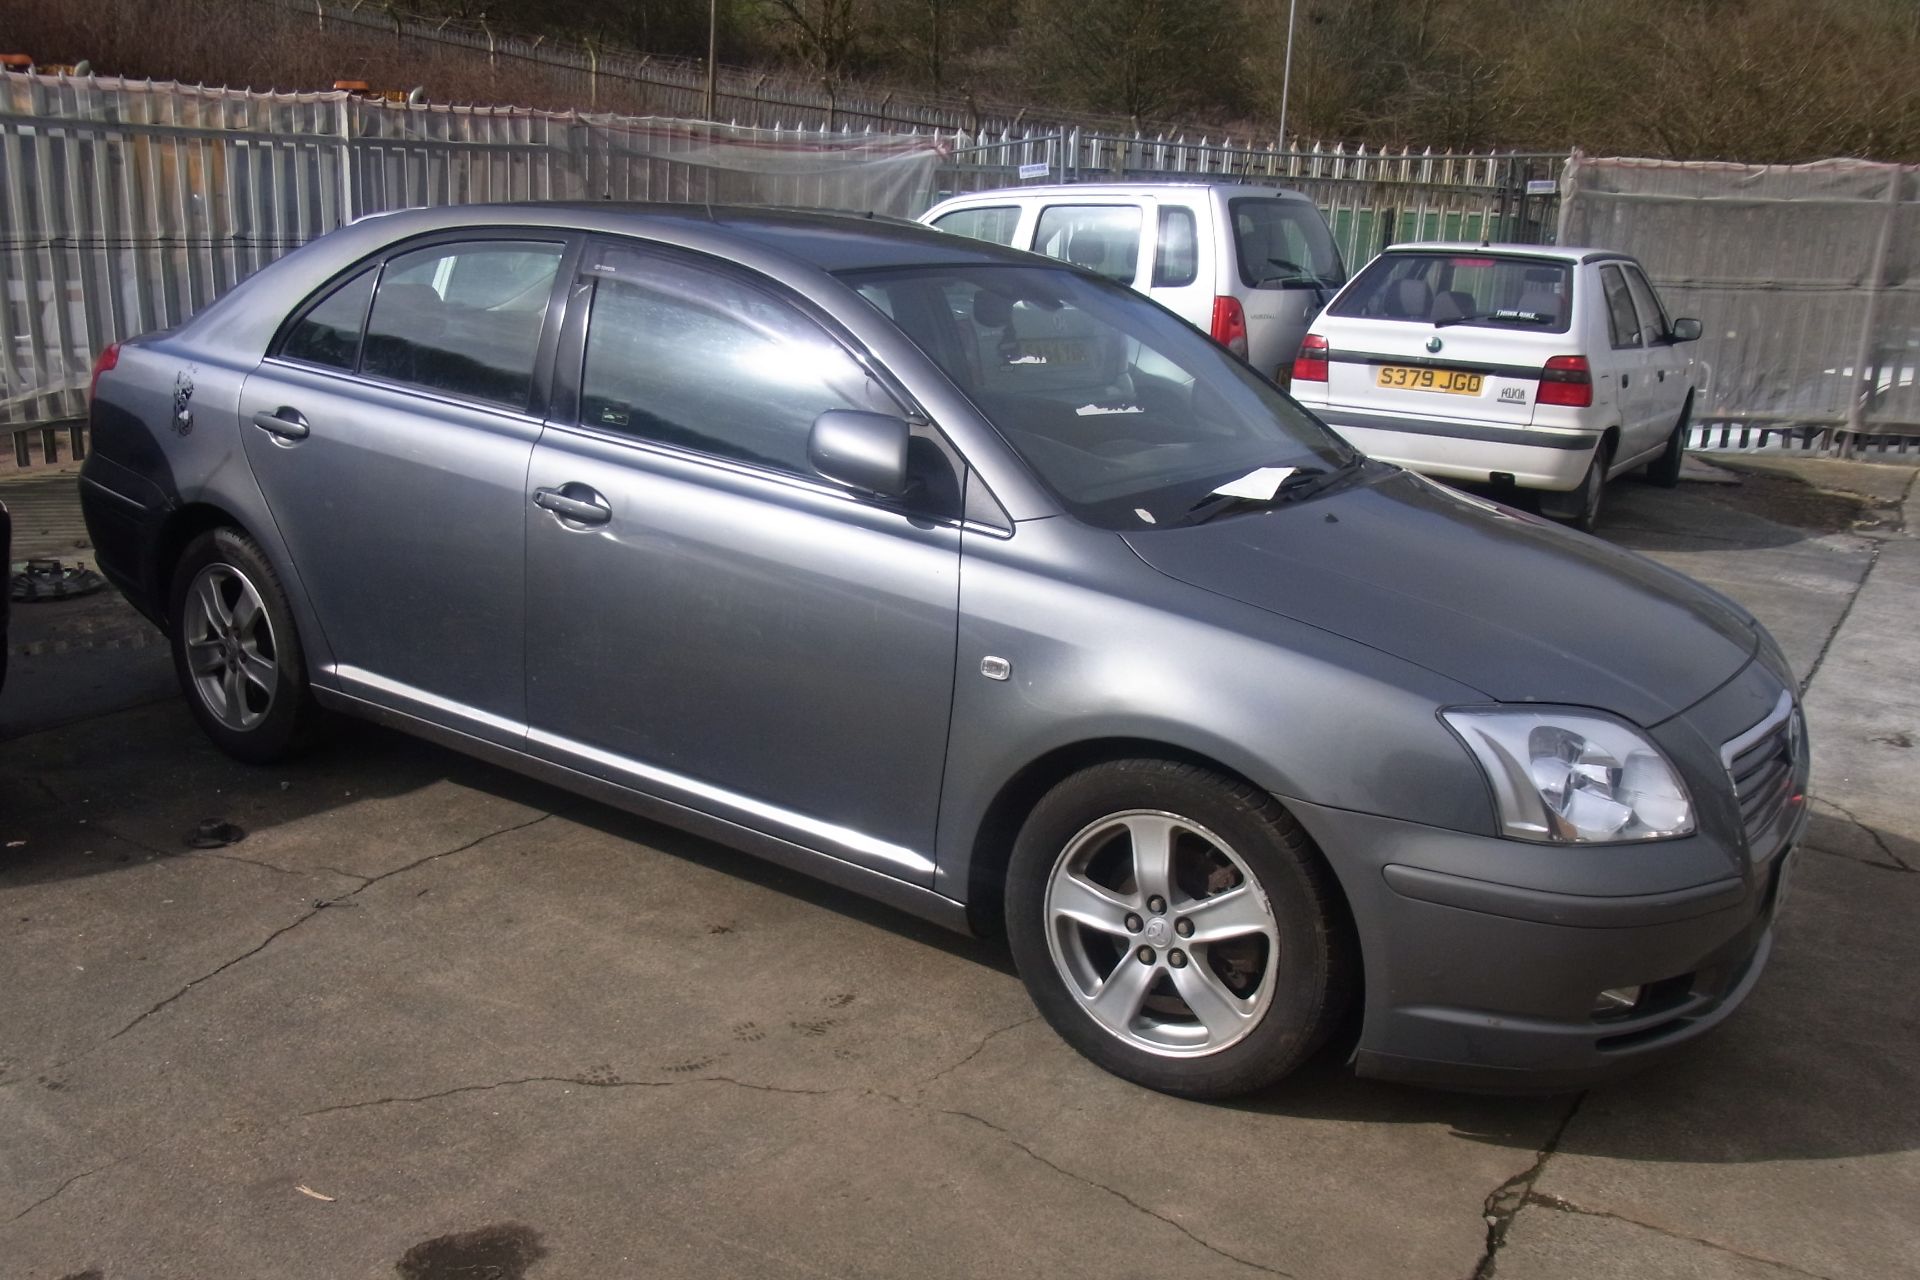 LT54 YTC - Toyota Avensis T3-X - Image 2 of 3